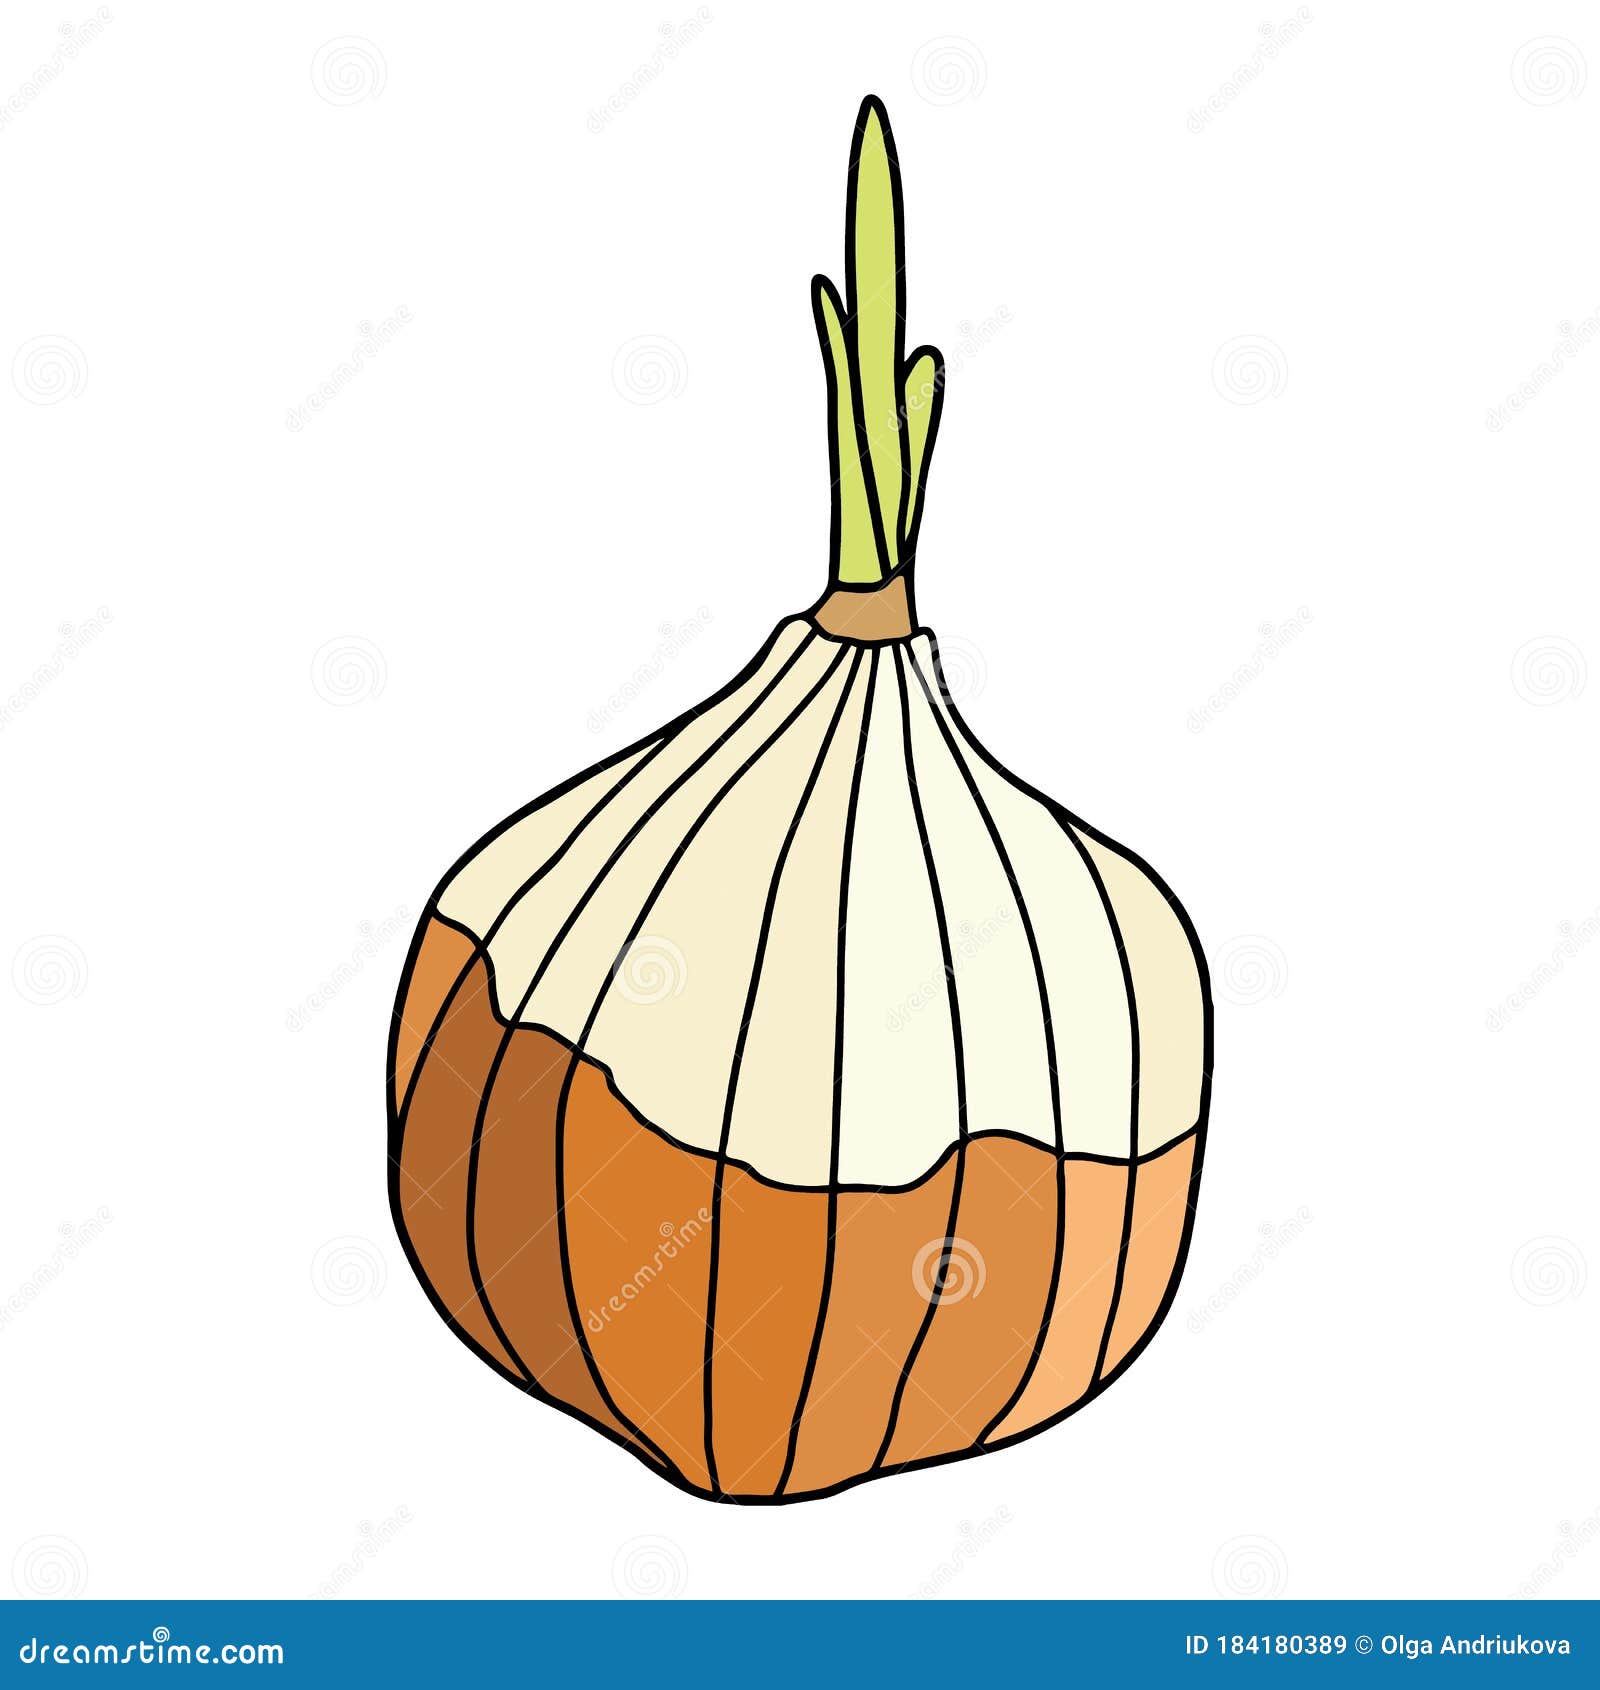 8,169 Red Onion Drawing Images, Stock Photos & Vectors | Shutterstock